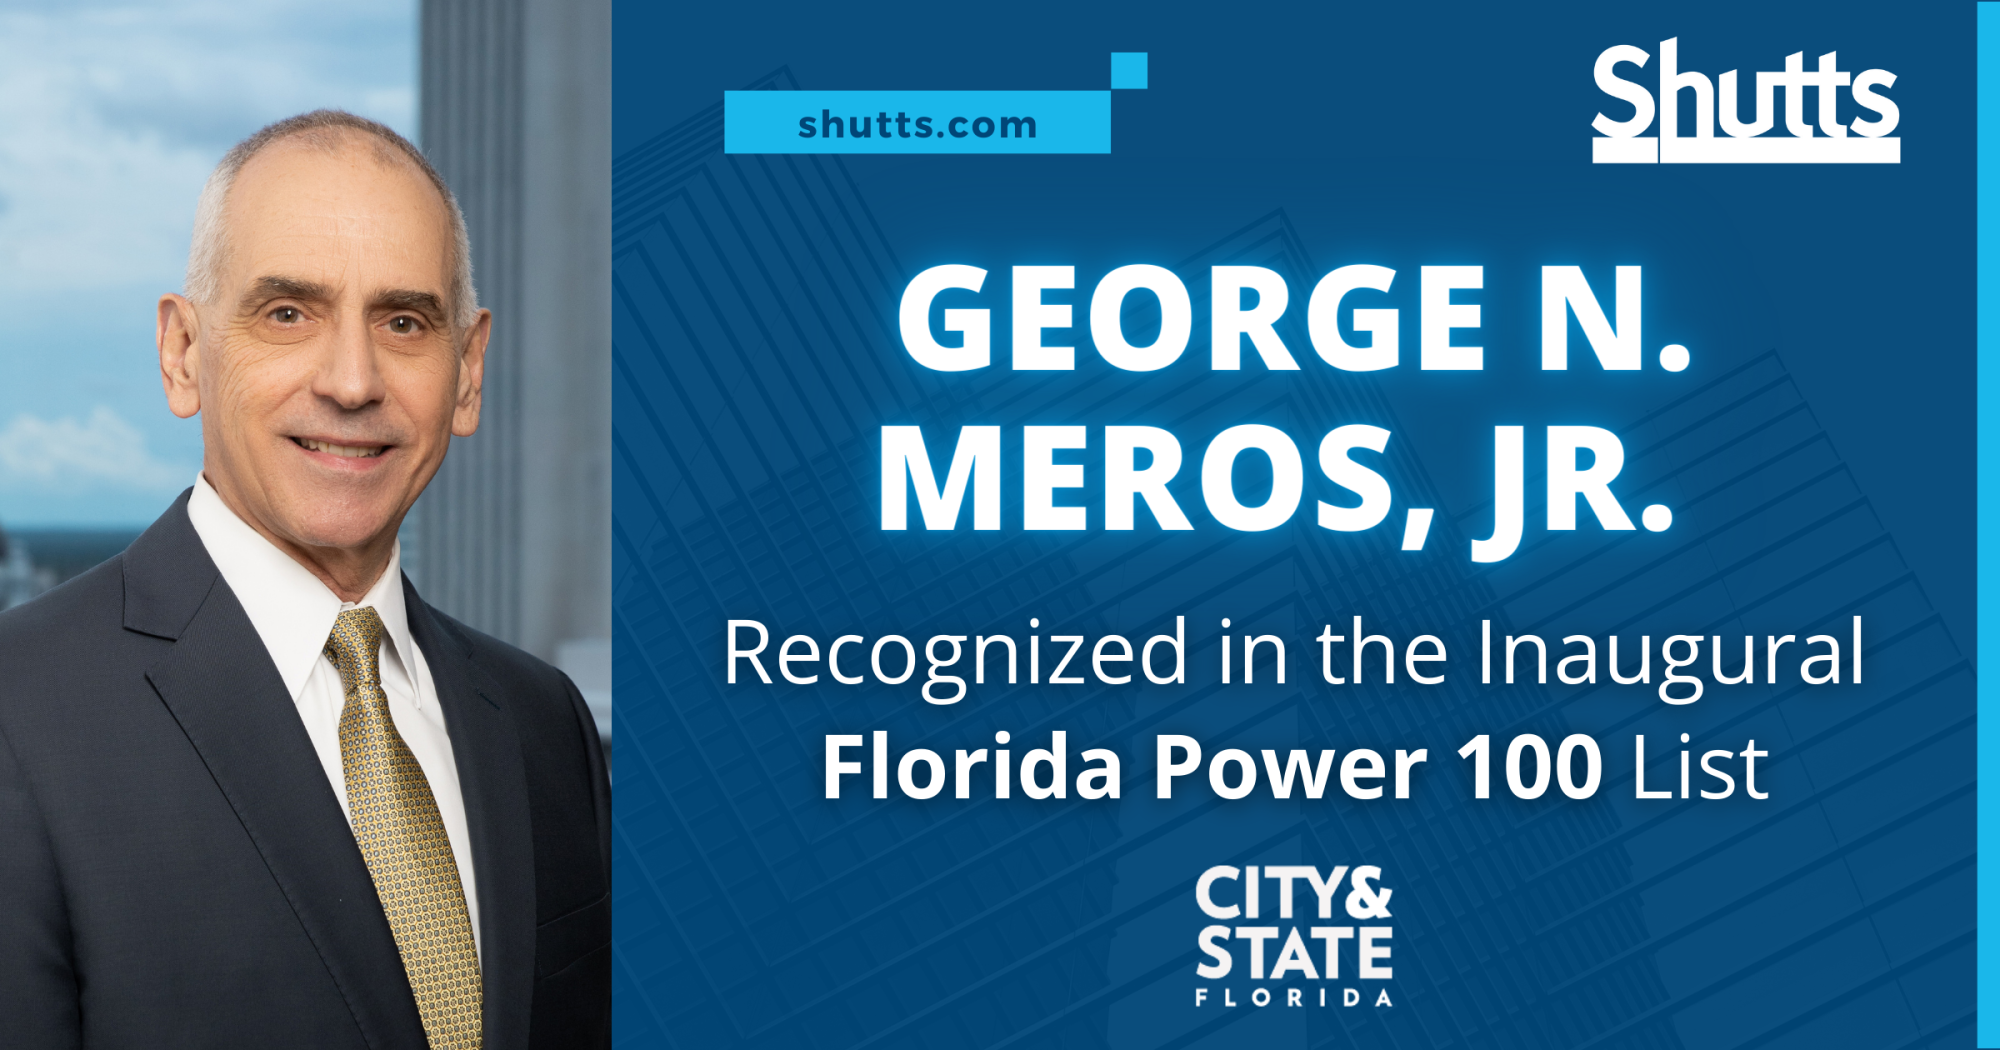 George N. Meros, Jr. Recognized in the Inaugural Florida Power 100 List